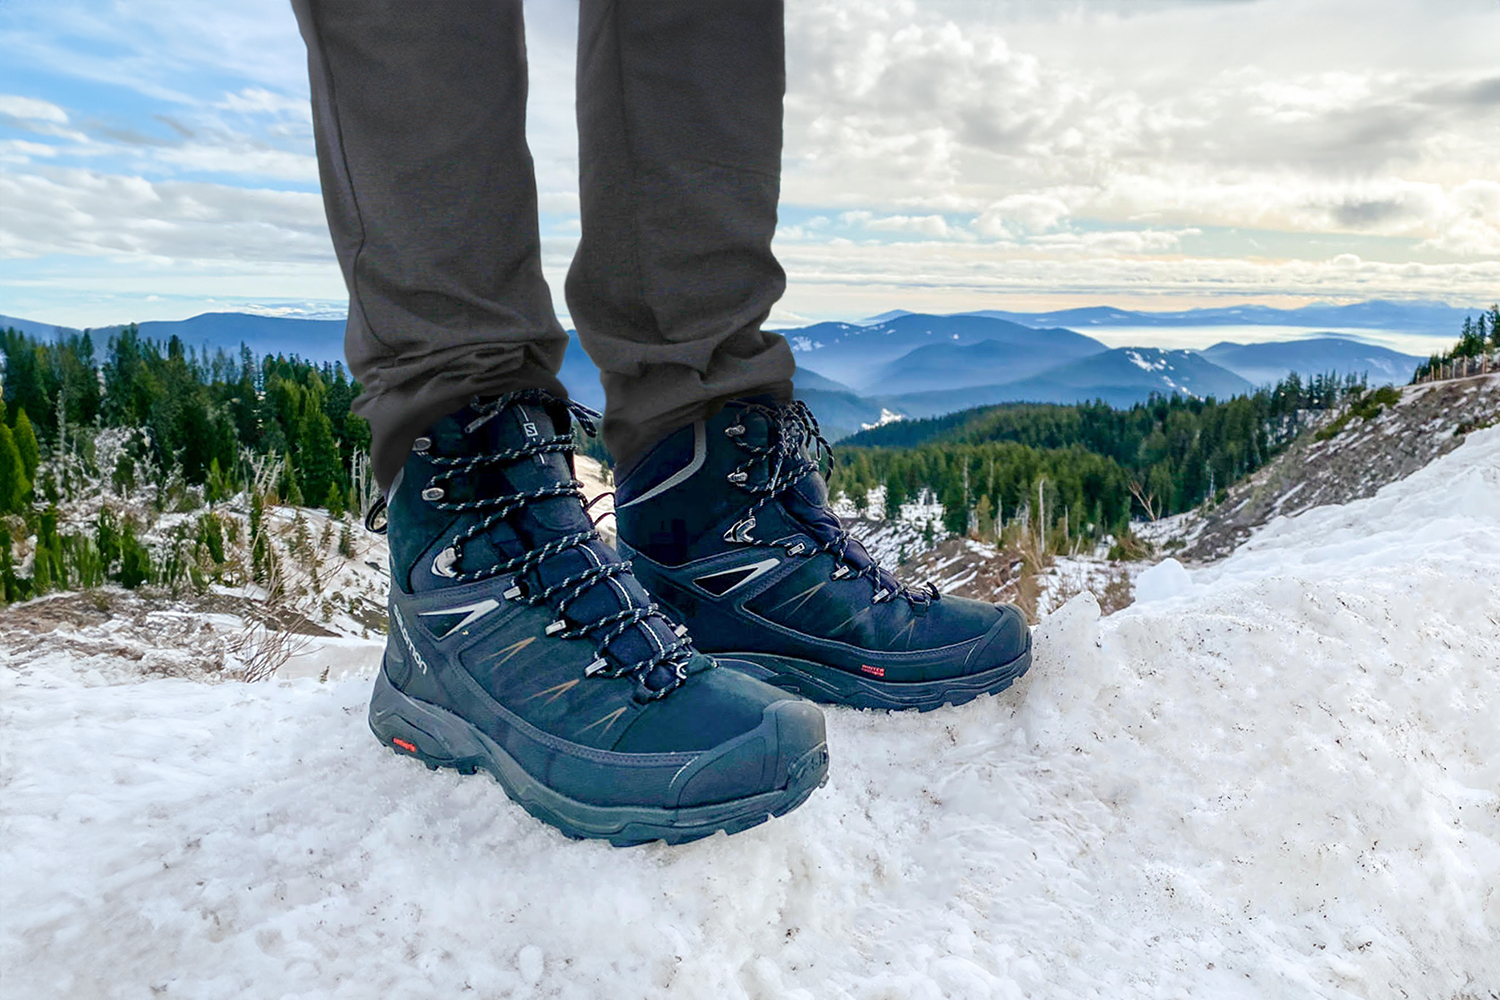 A hiker standing on a snowbank in the Salomon X Ultra Mid Winter boots with blue mountains on the horizon